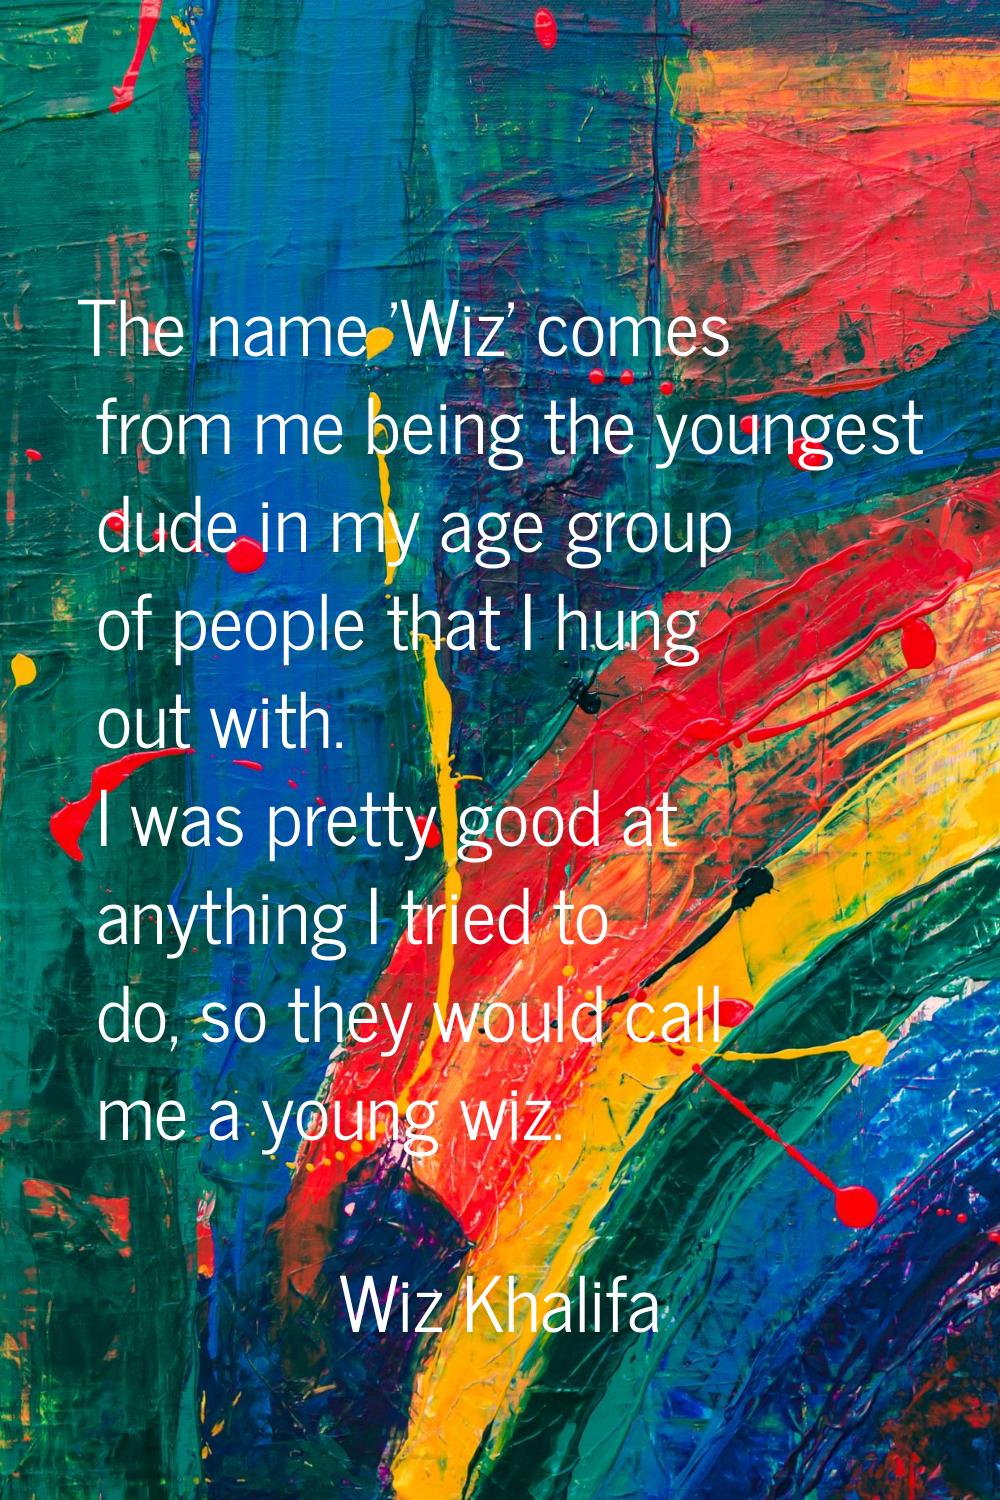 The name 'Wiz' comes from me being the youngest dude in my age group of people that I hung out with